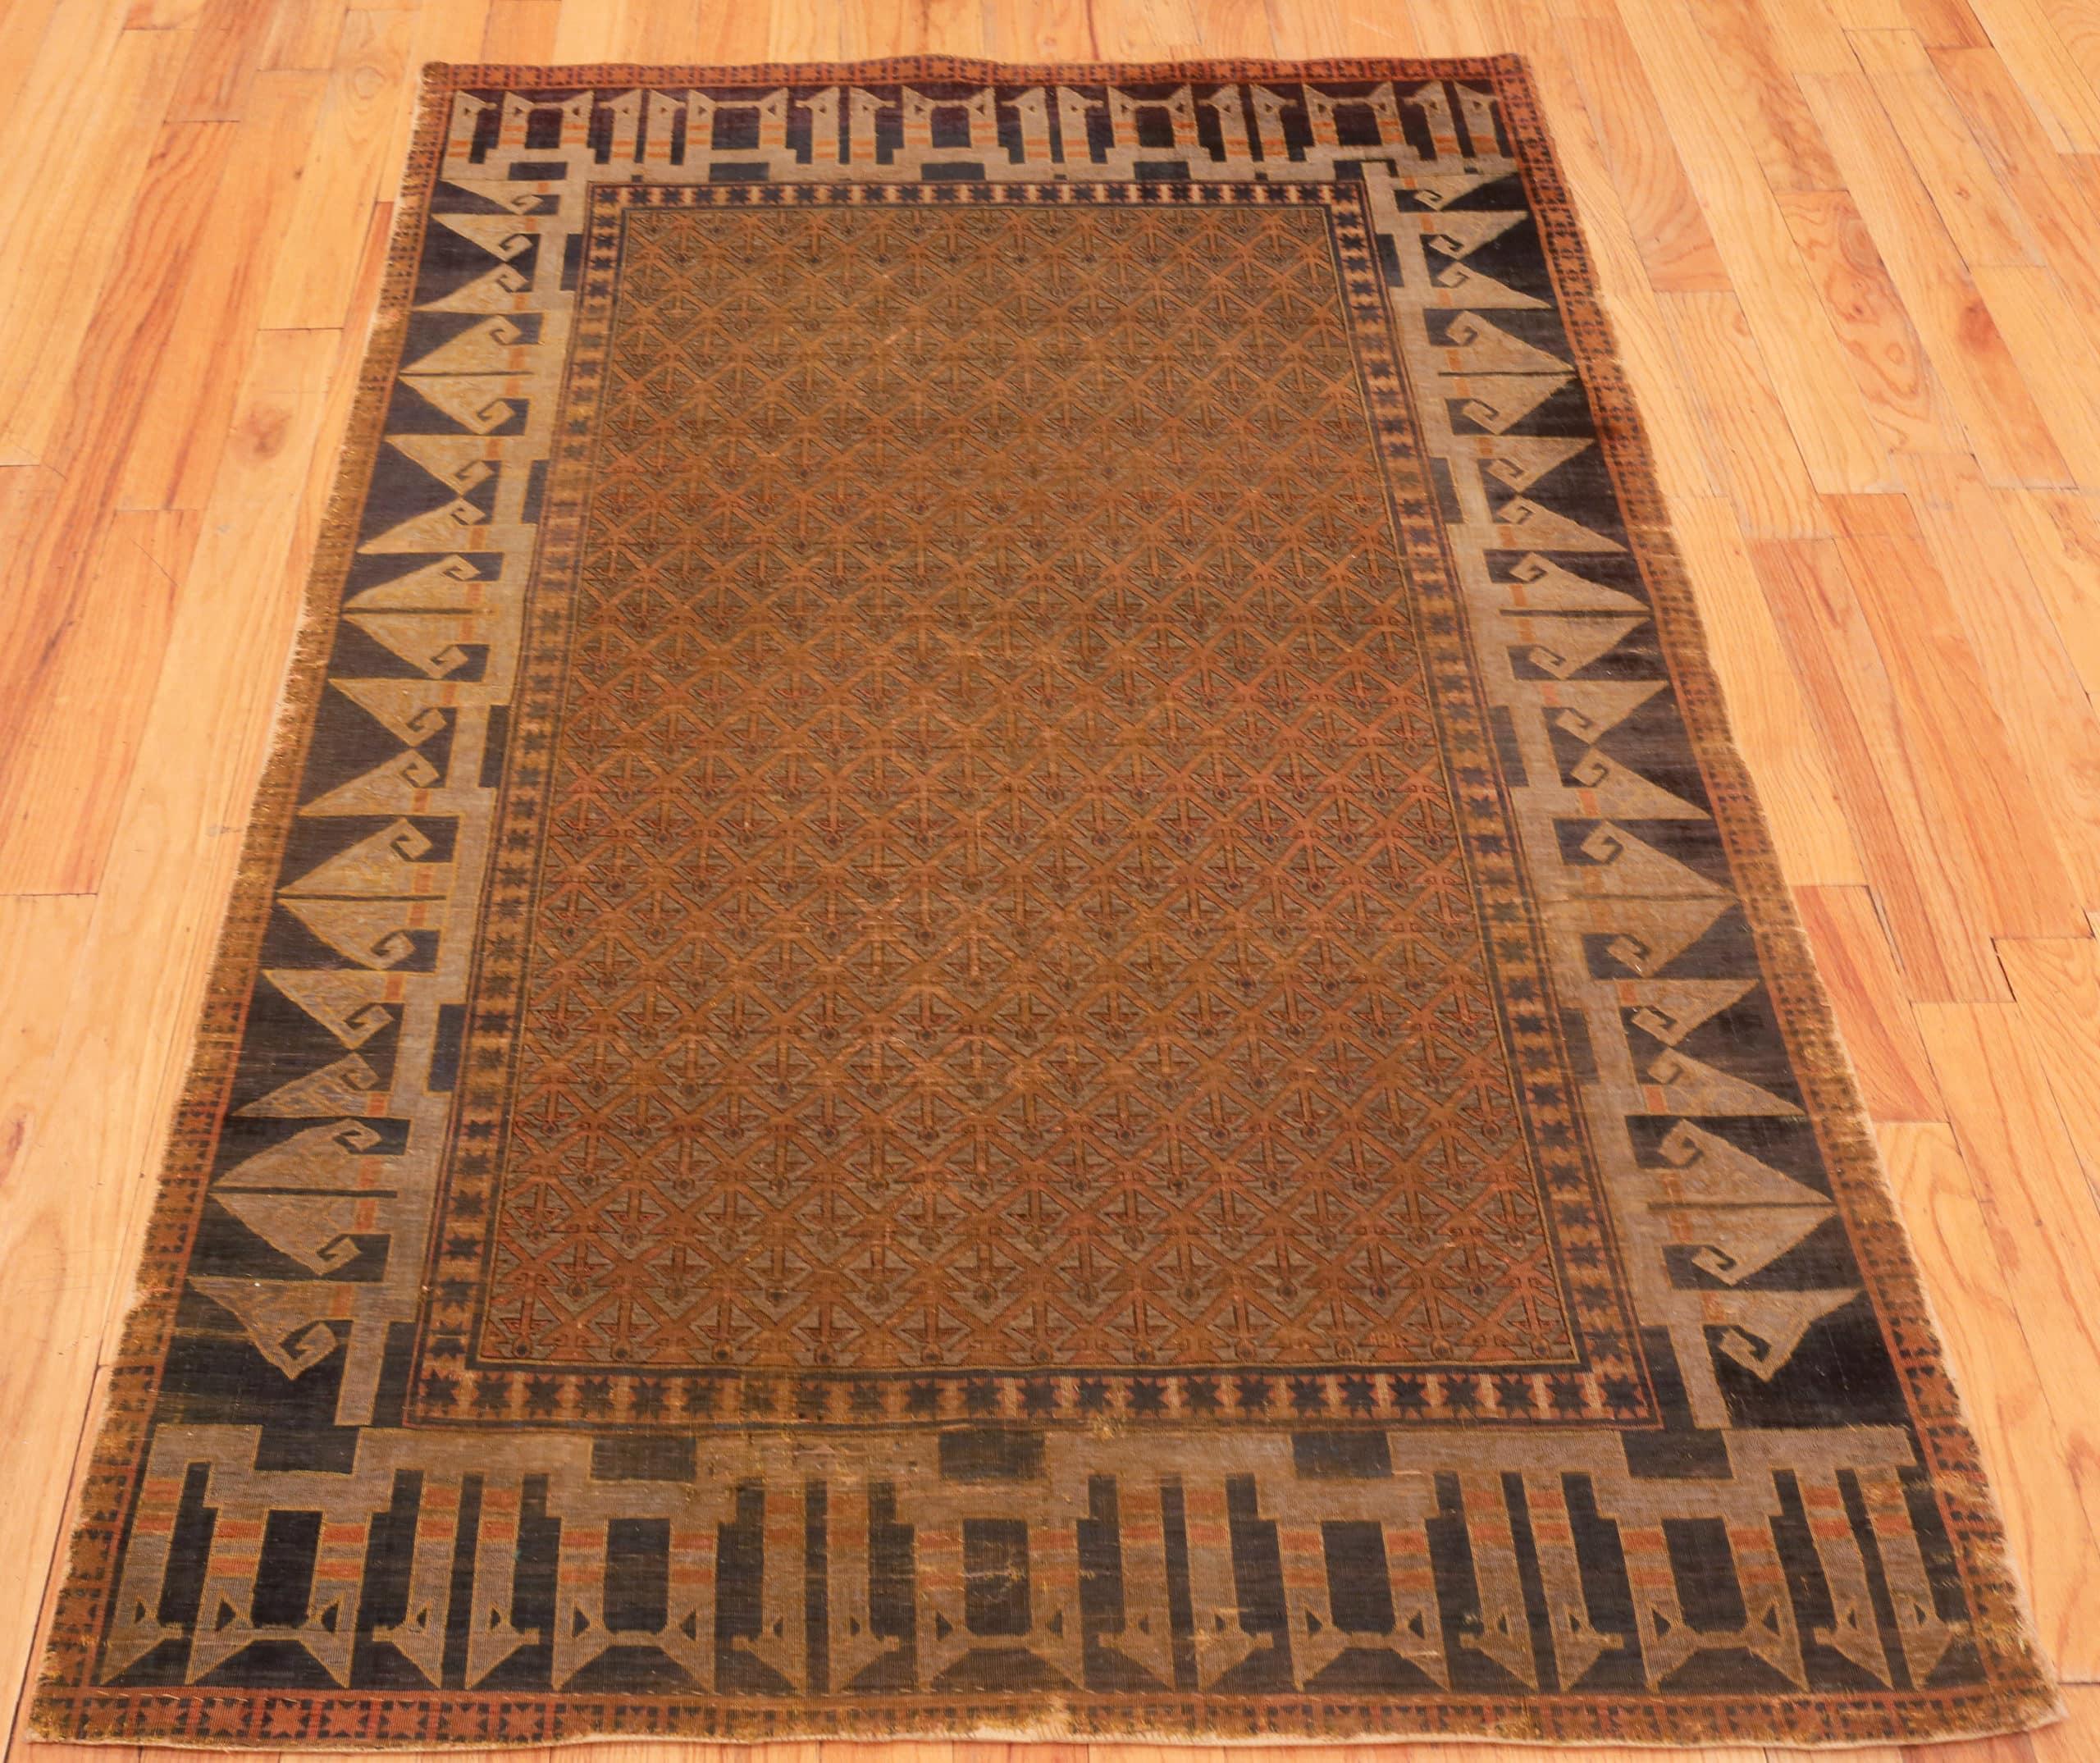 Hand-Knotted Glorious Silk And Metallic Silver Antique Turkish Seljuk Design Rug 4'2